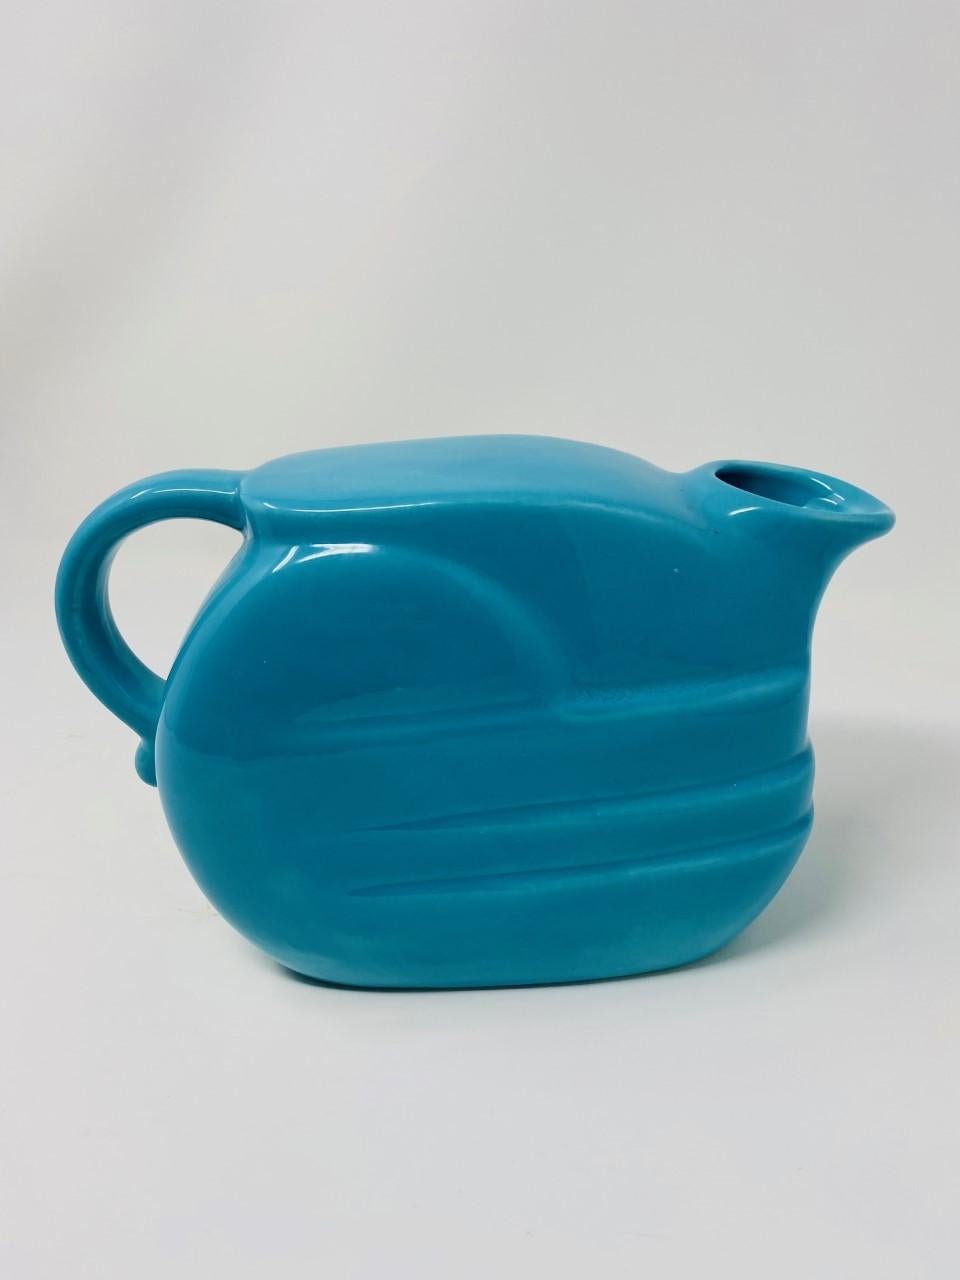 Vintage Aqua Blue Pitcher by Joseph Magnin Italy, Mid Century, 1960 In Good Condition For Sale In San Diego, CA